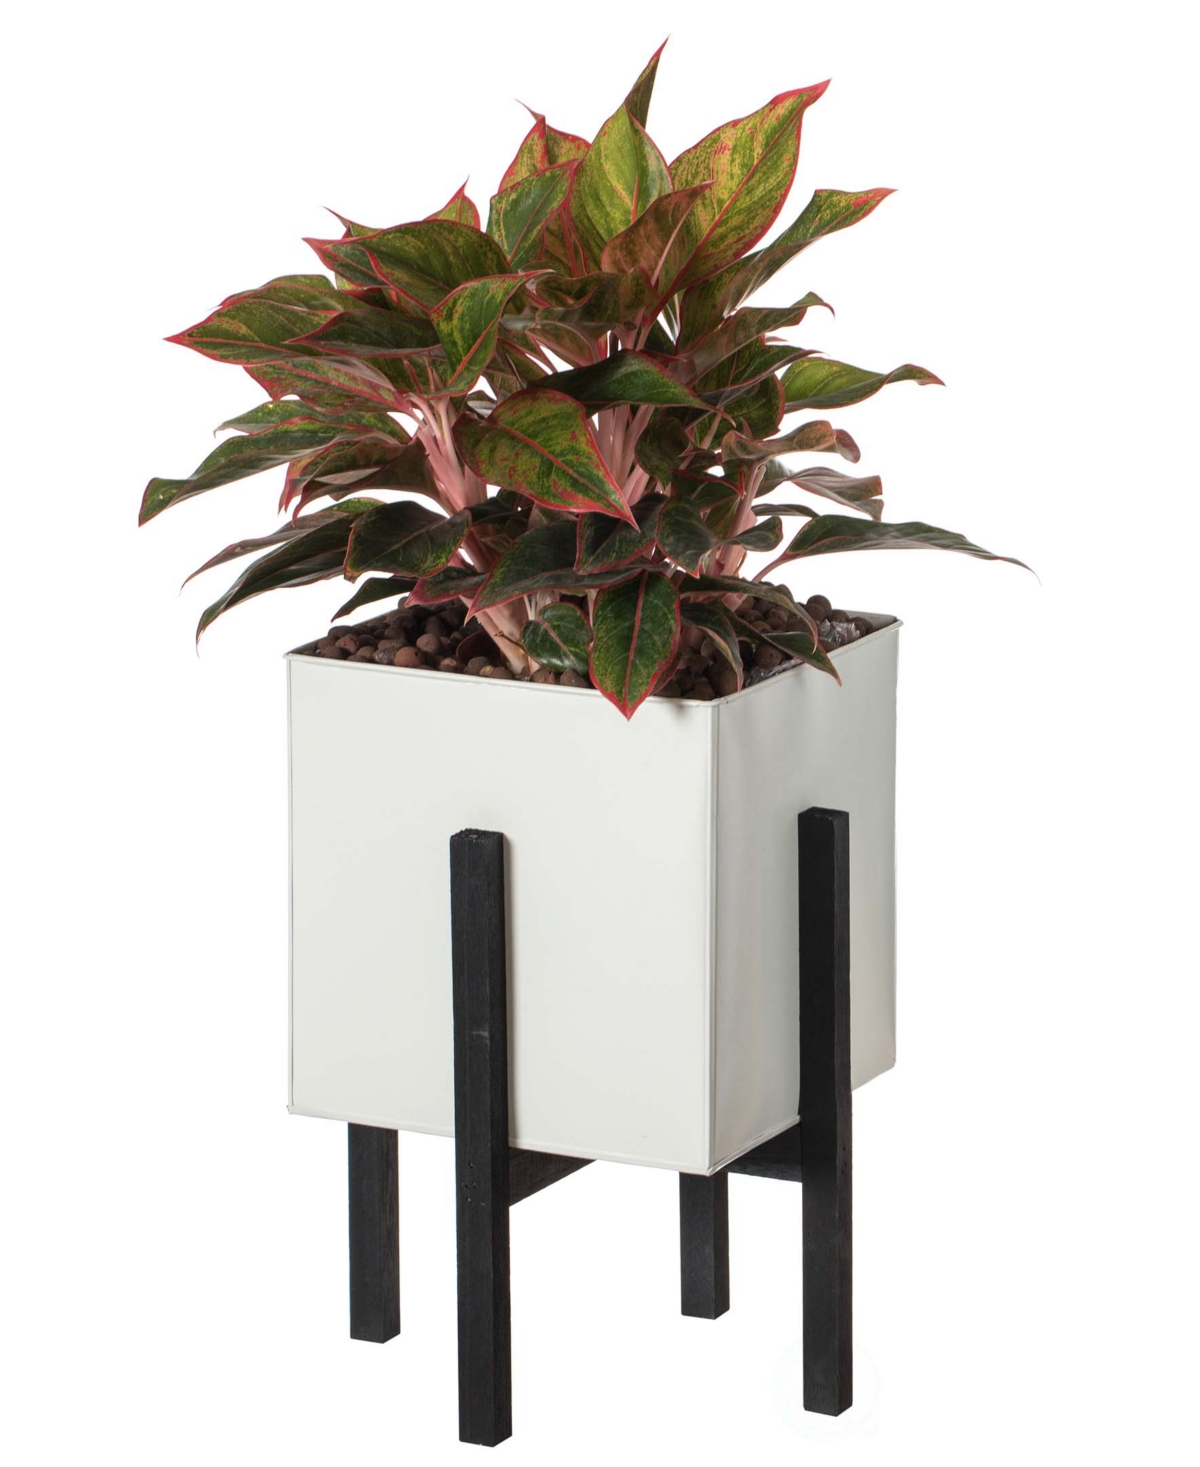 Indoor and Outdoor Planting Box, Large Planter - White